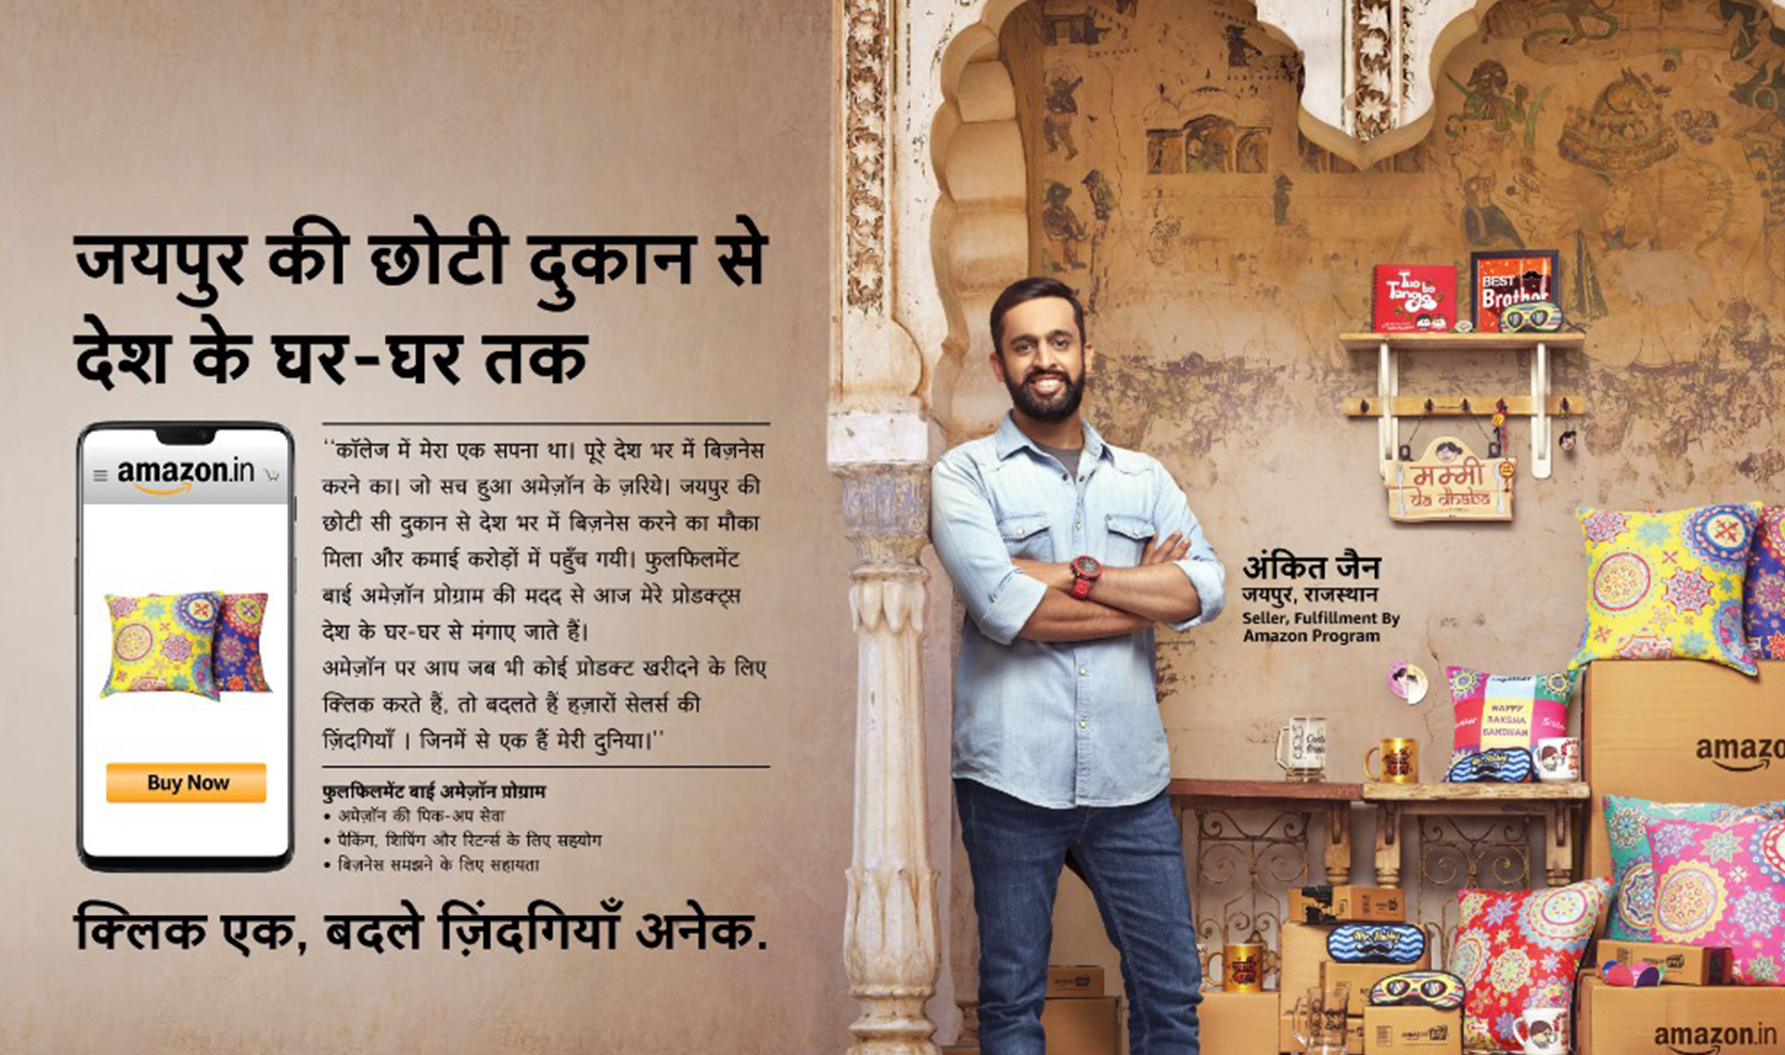 जयपुर से देश के घर घर तक | How a Jaipur’s startup Indibni, was chosen to be the face of Amazon in India